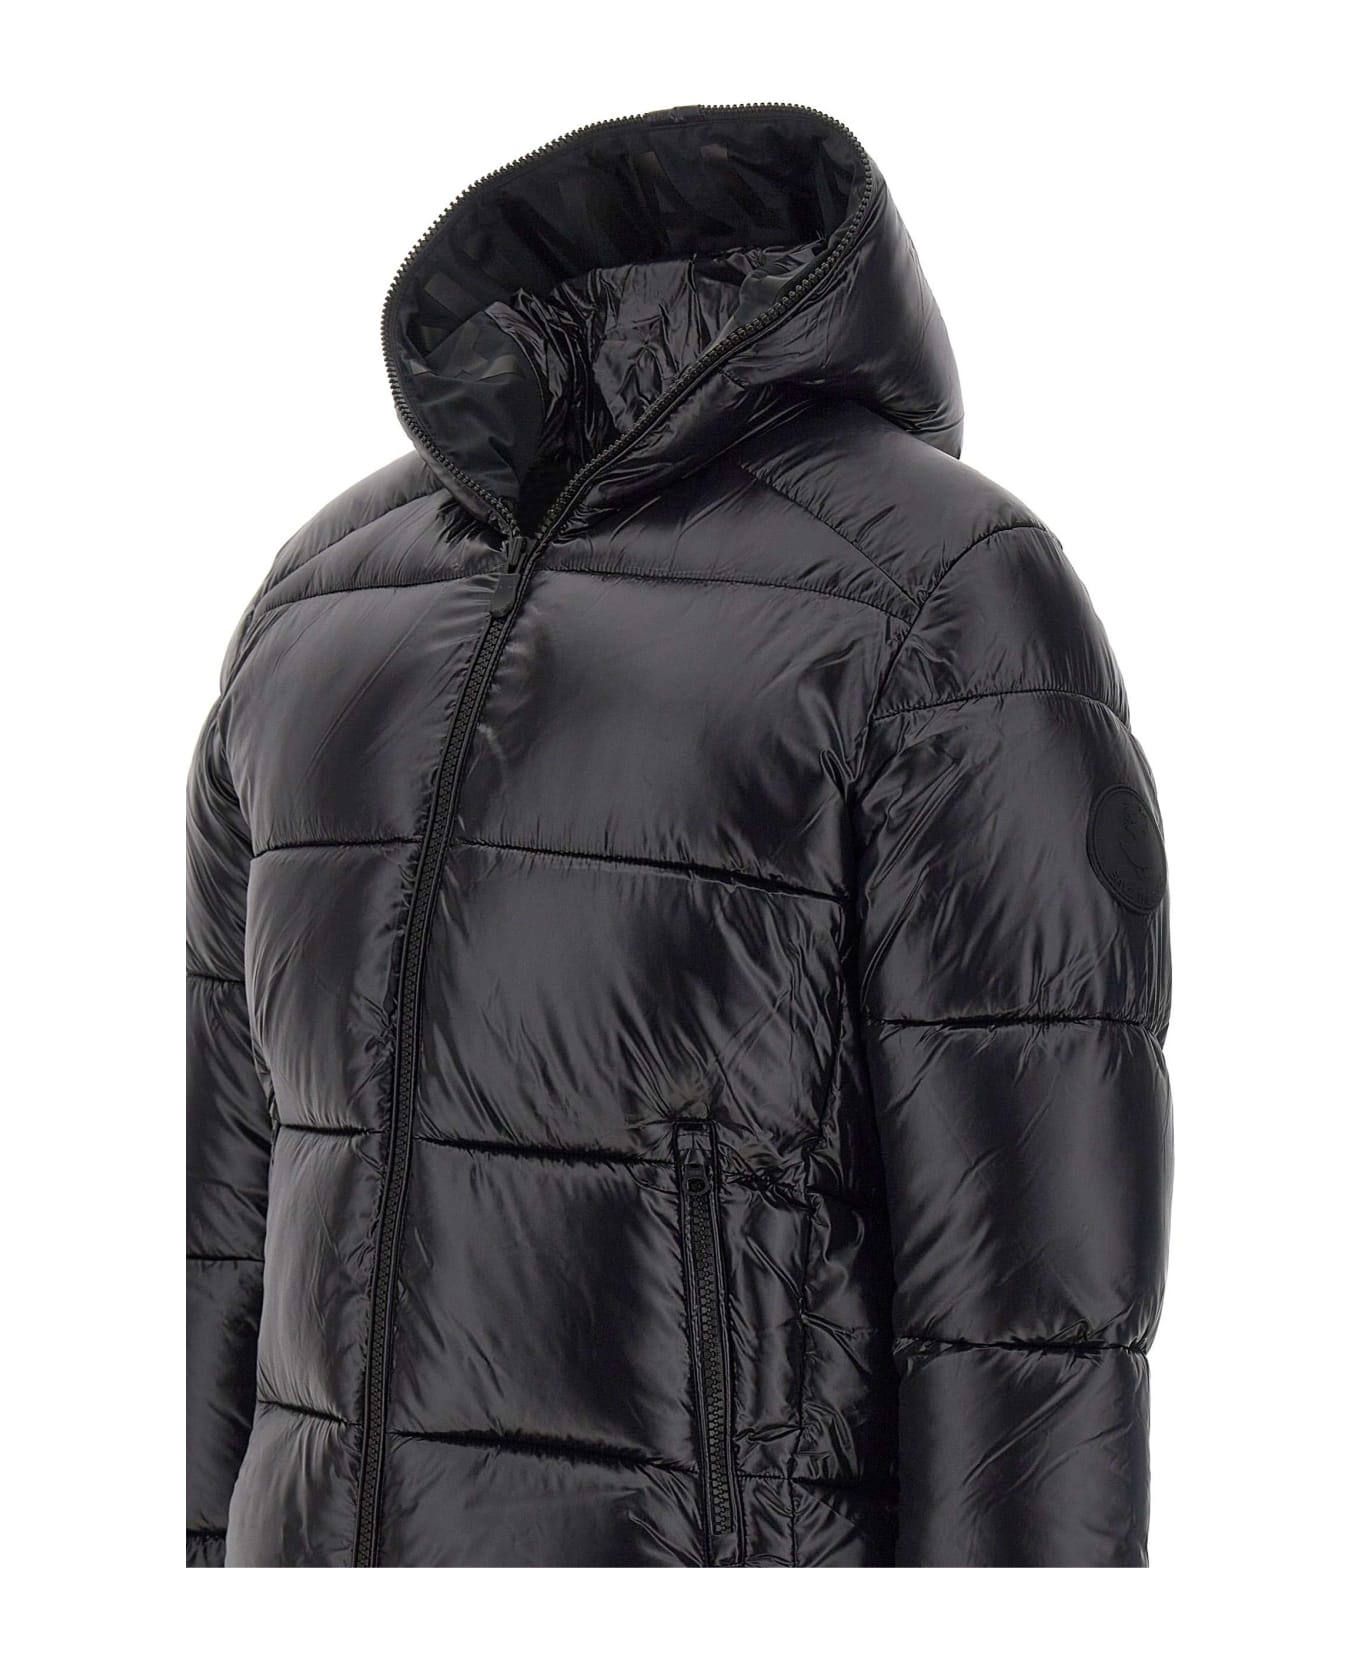 Save the Duck 'luck17 Edgard' Down Jacket - Black